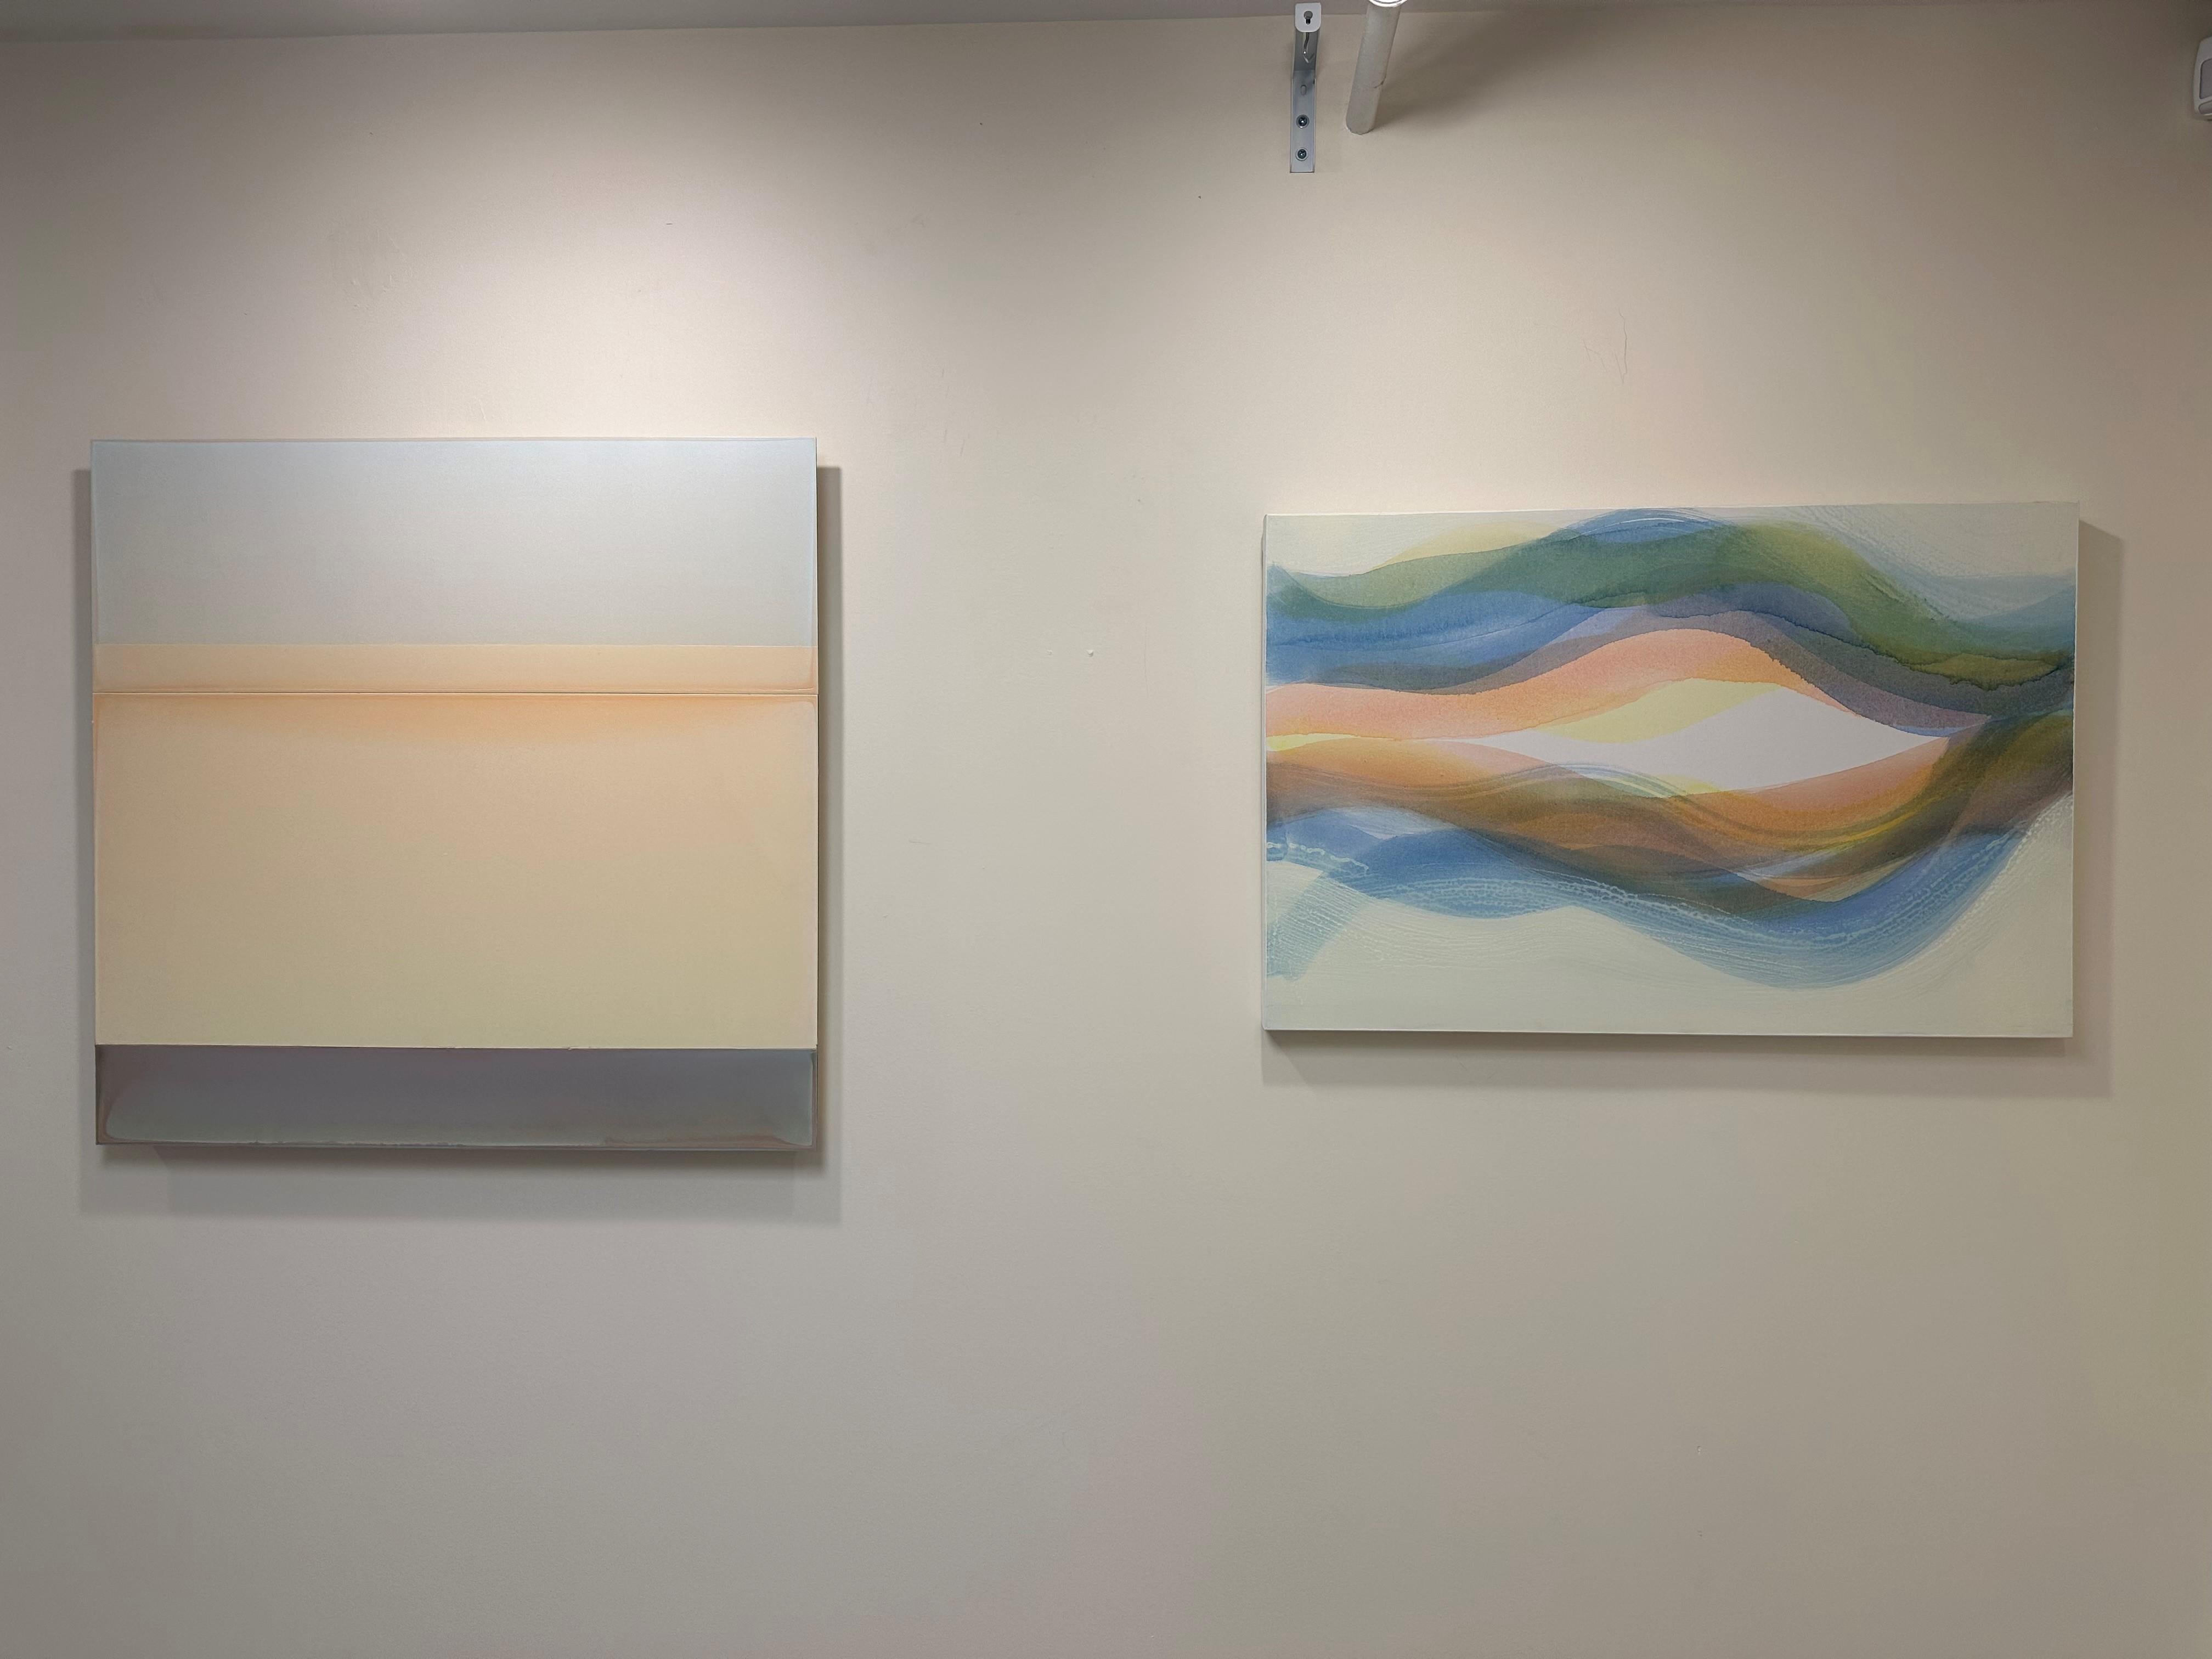 Locale, Blue, Light Peach Orange, Green, Soft Yellow Undulations, Color Waves - Contemporary Painting by Margaret Neill